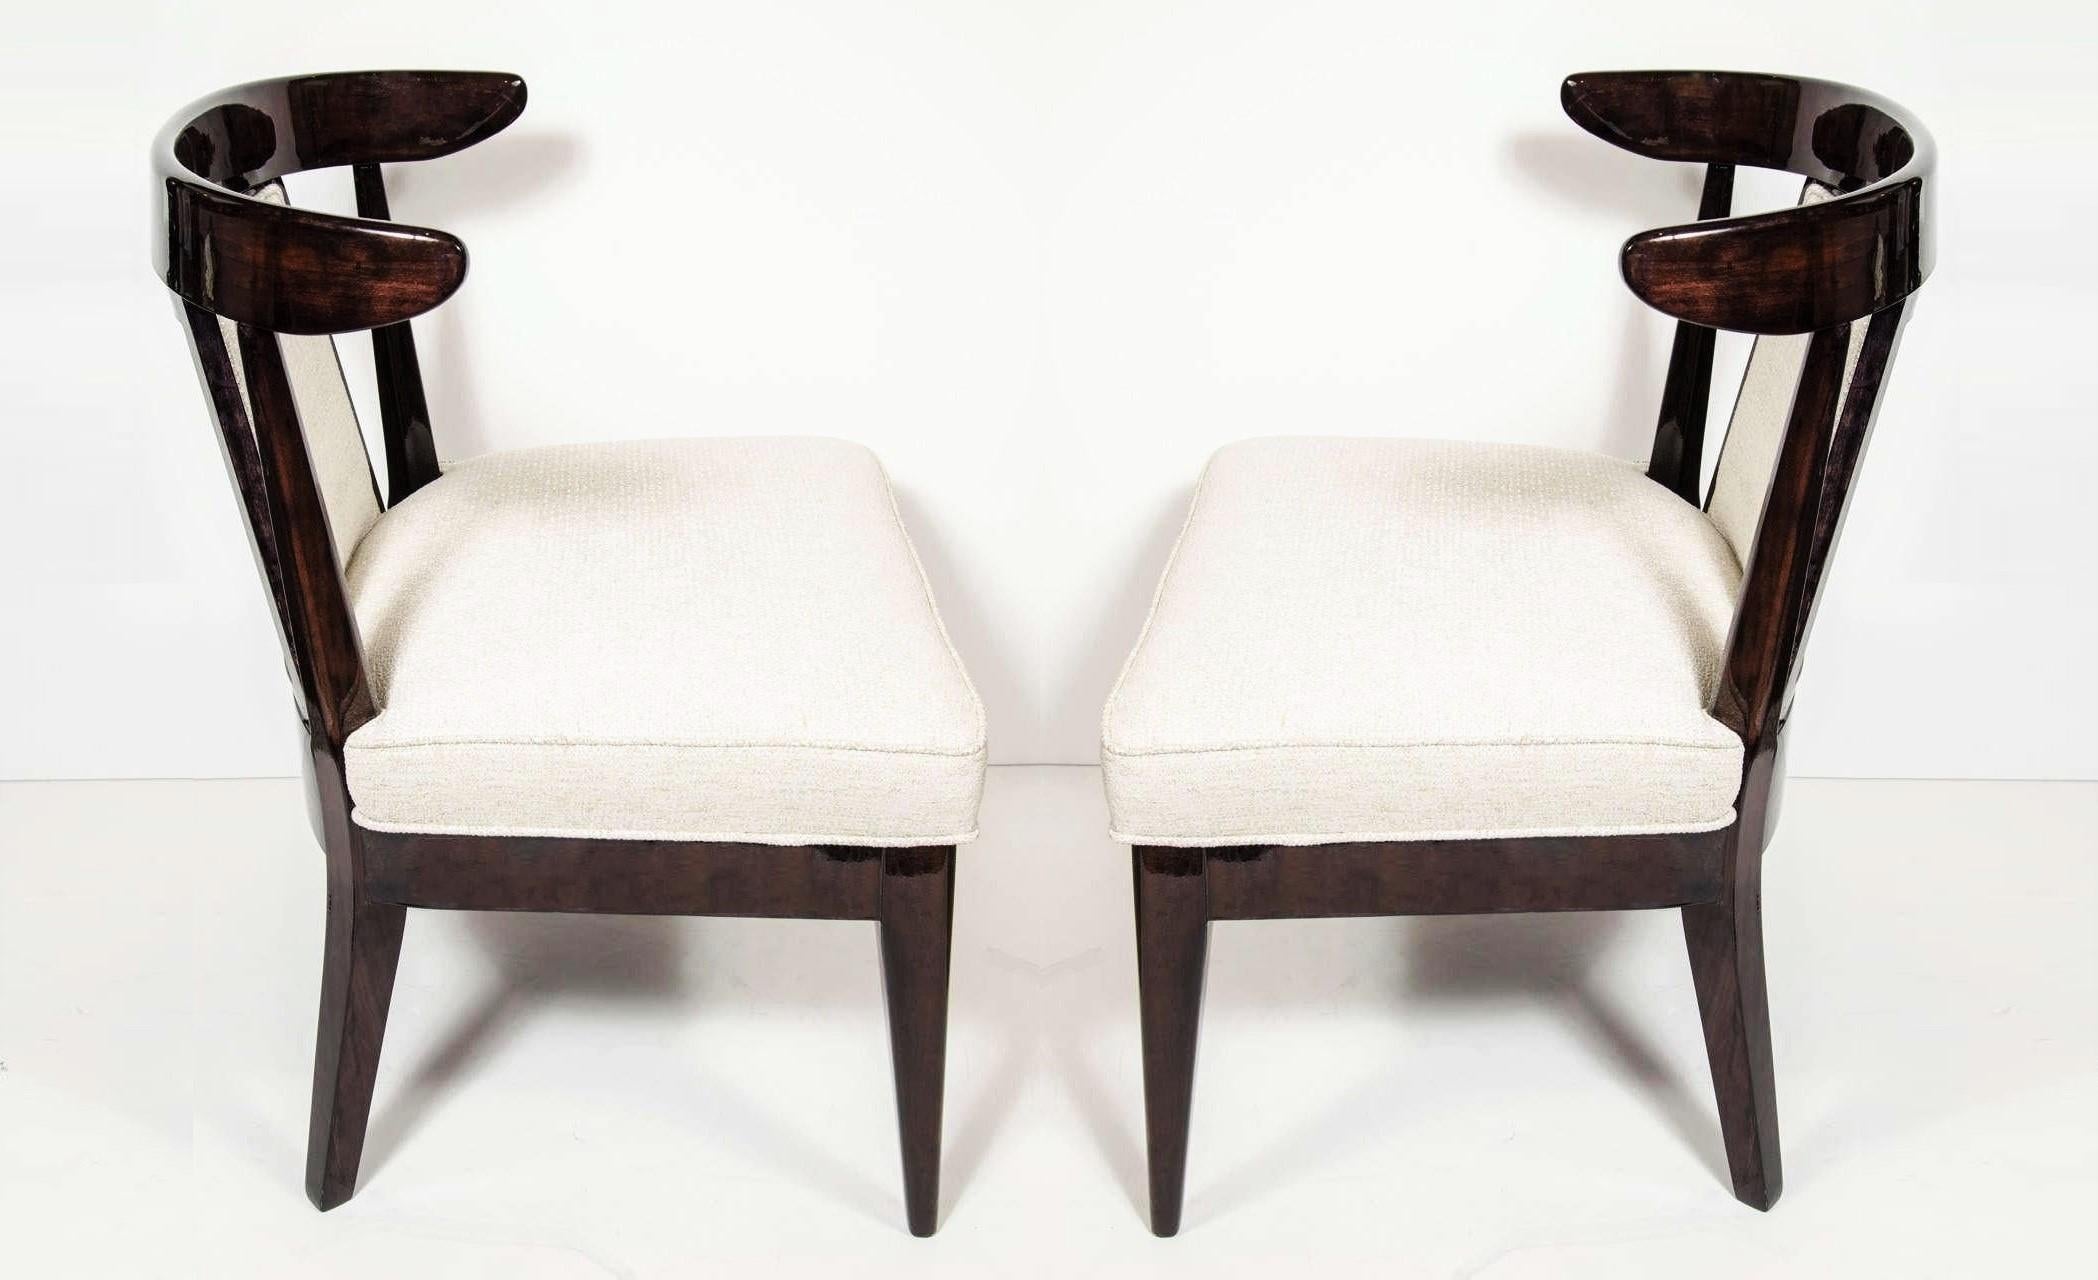 These very sophisticated pair of low profile chairs are a perfect blend of Hollywood Glam and Mid-Century Modern design. Featuring ebonized walnut klismos form frames with upholstered splat backs and seats that rise above tapered legs. Beautifully